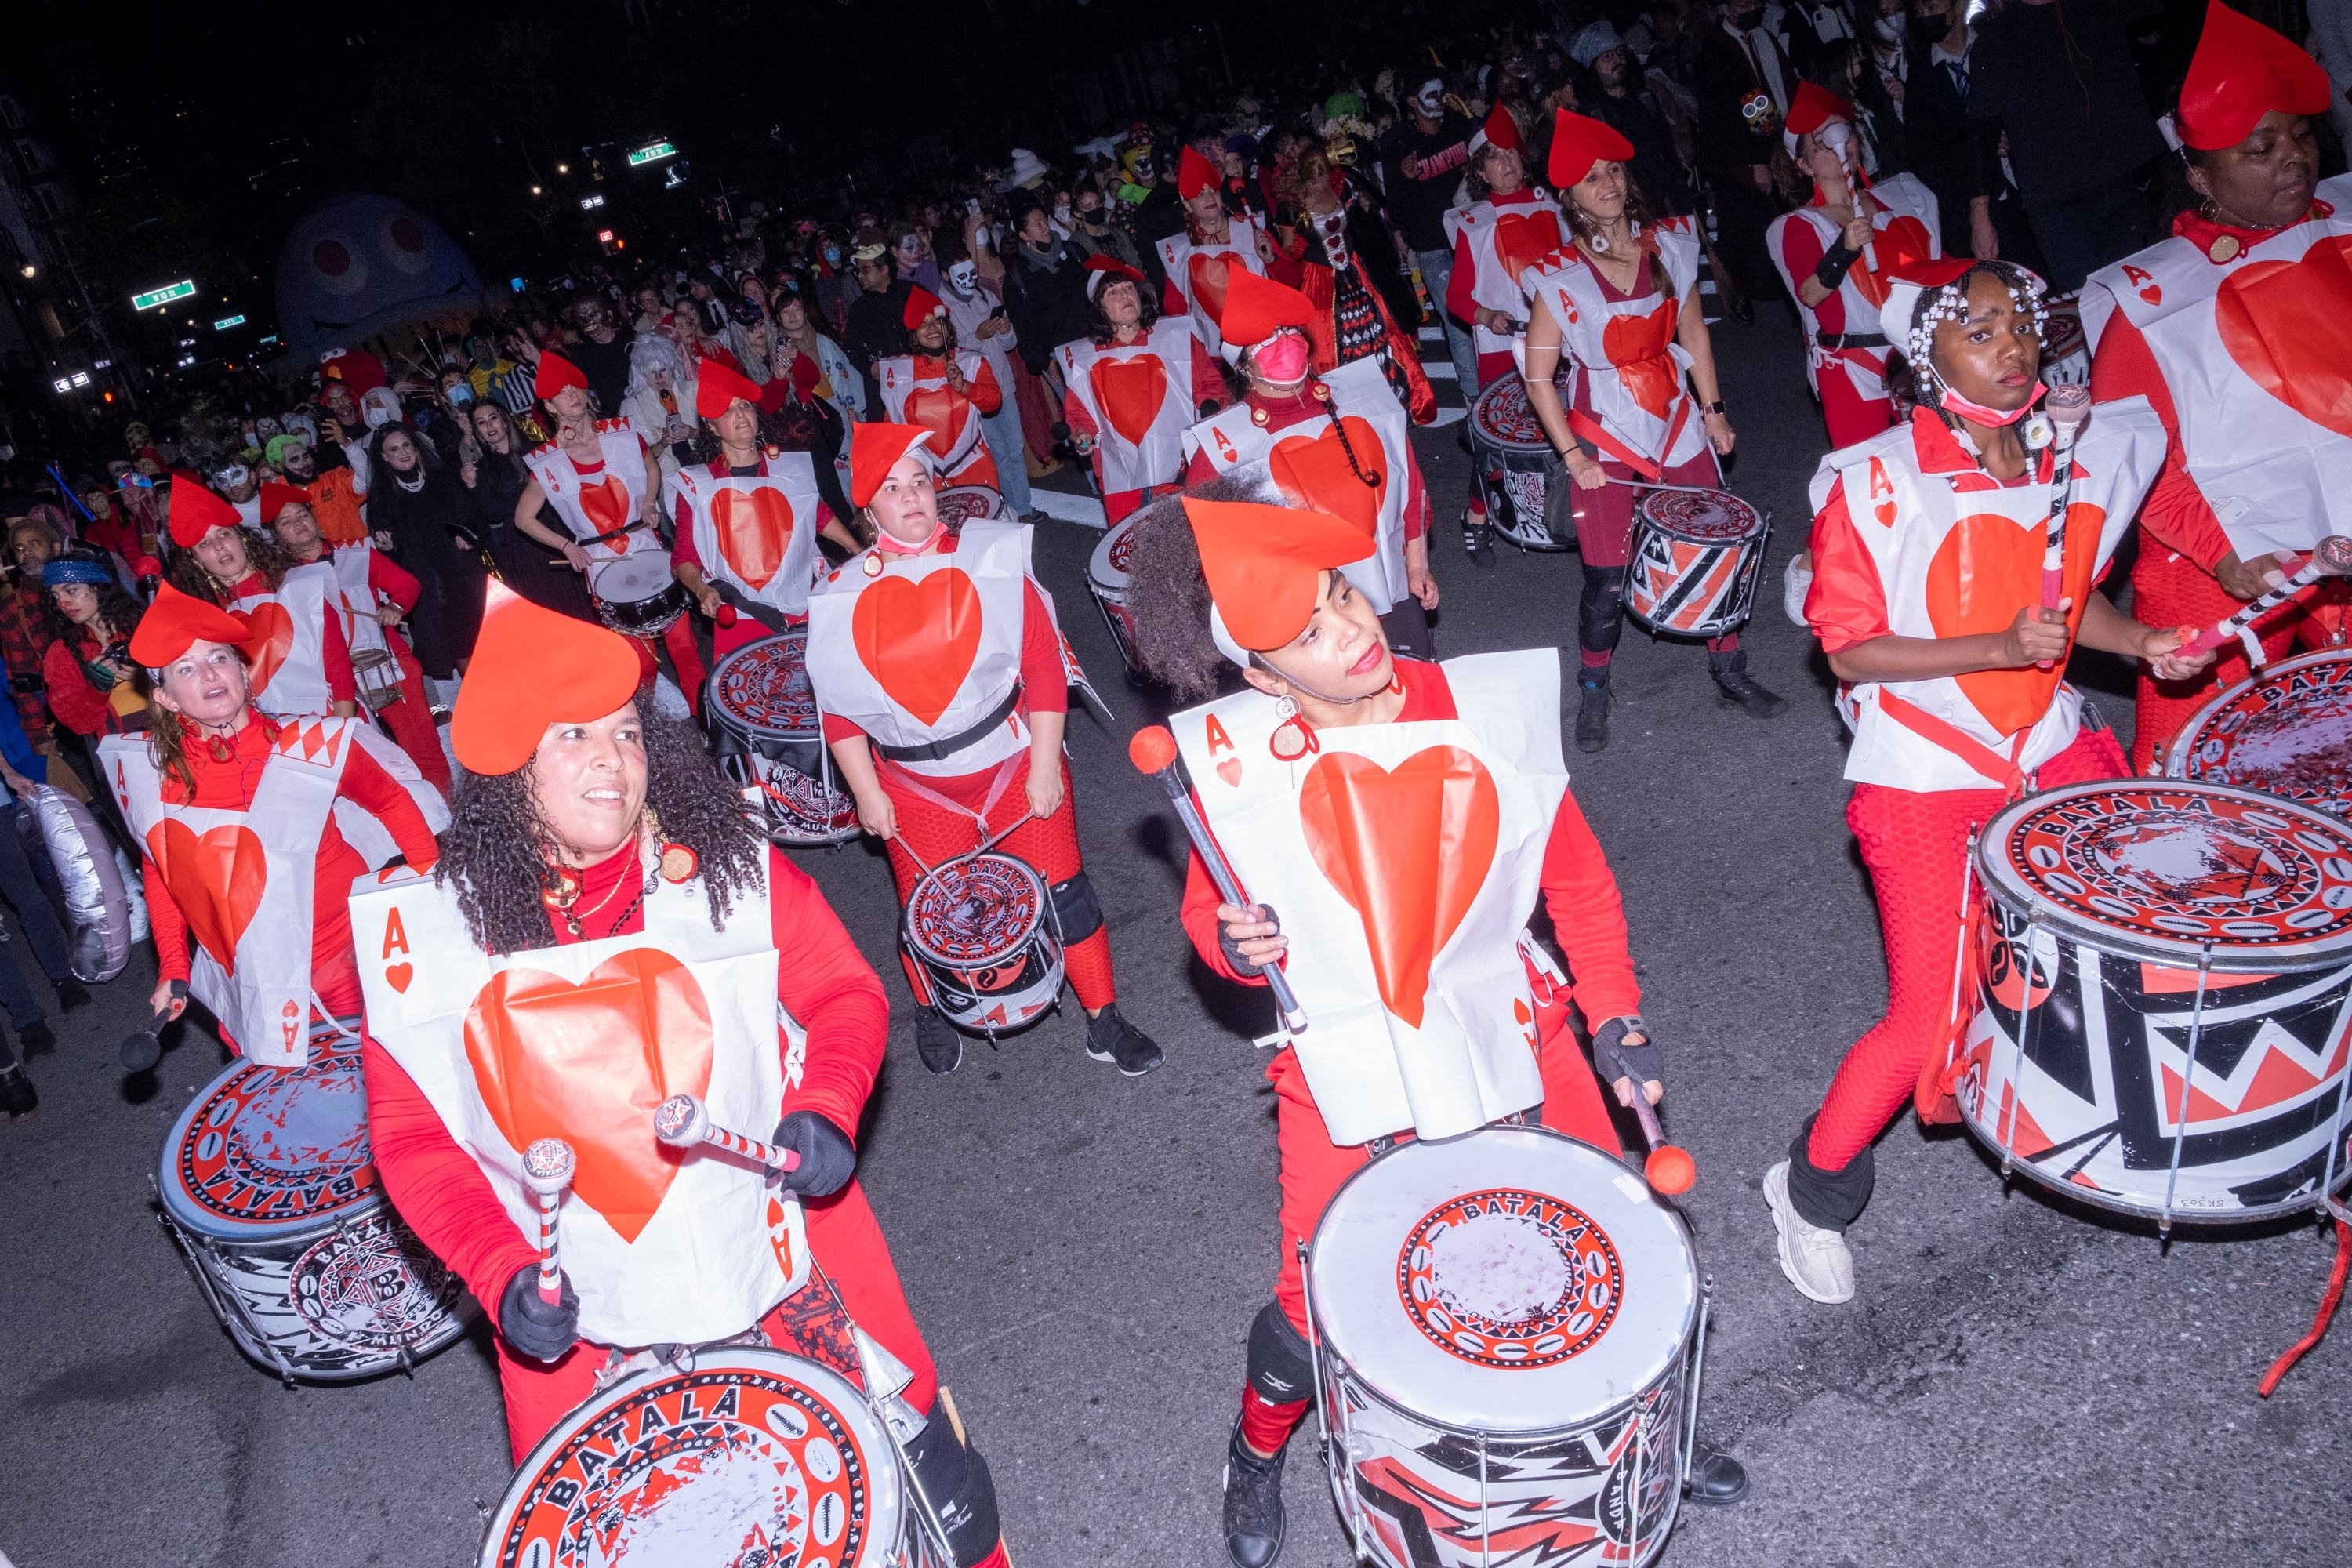 A large group of people dressed as playing cards banging drums